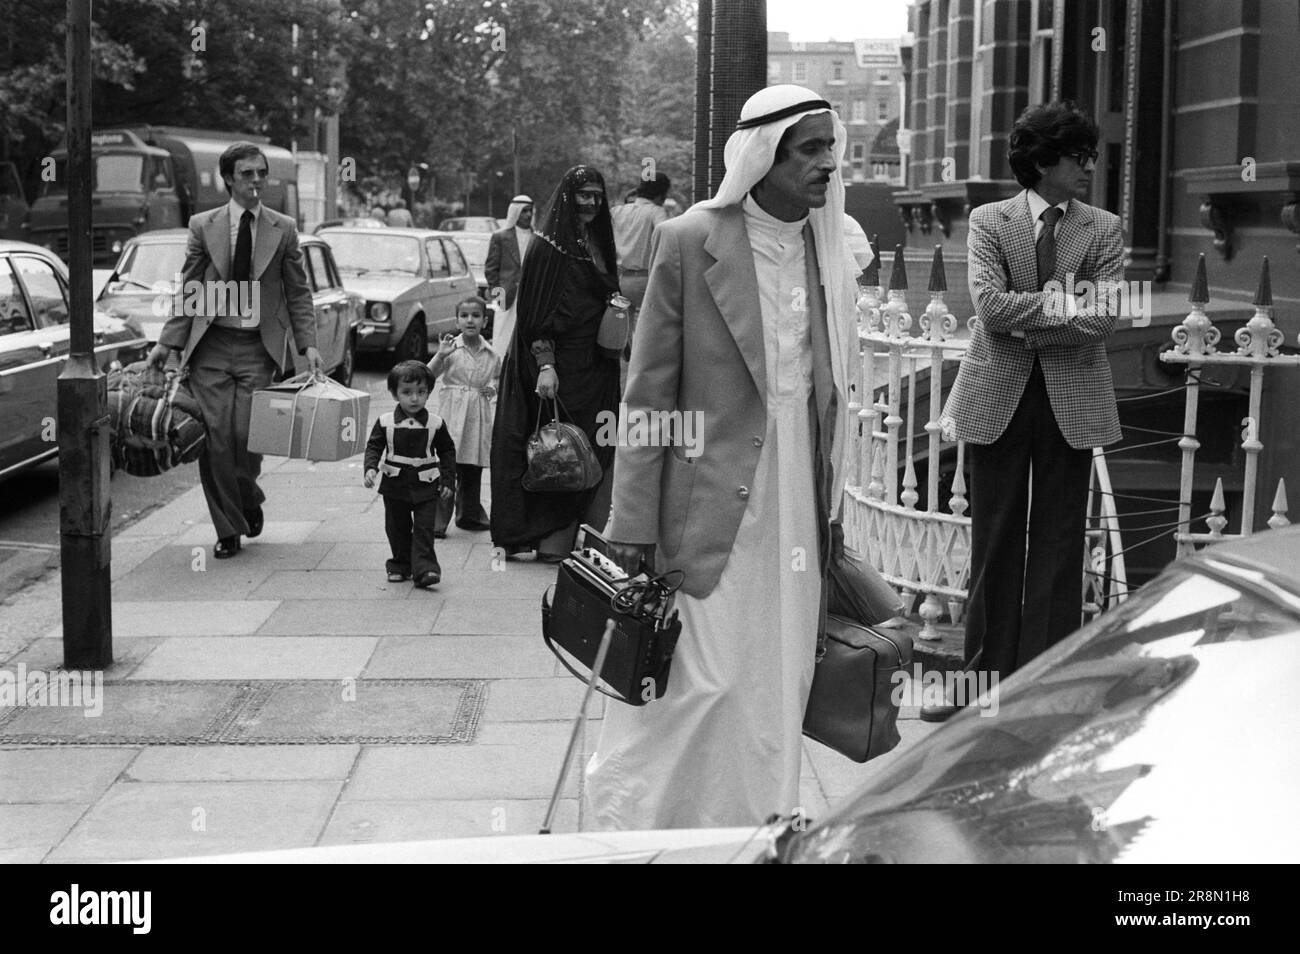 Arab Family in London with minder preparing to go home with stuff they have bought 1970s UK. Middle Eastern people came to Britain for subsidised health care in Harley Street clinics. They mainly stayed in cheap hotels in Earls Court. An Arab family leaving, the woman is wearing a Battoulah face mask indicated that she is married.  They are with their children. A British helper carries their bags, he's walking towards the car that takes them to the airport. Earls Court, London, England circa 1977 70s UK HOMER SYKES Stock Photo